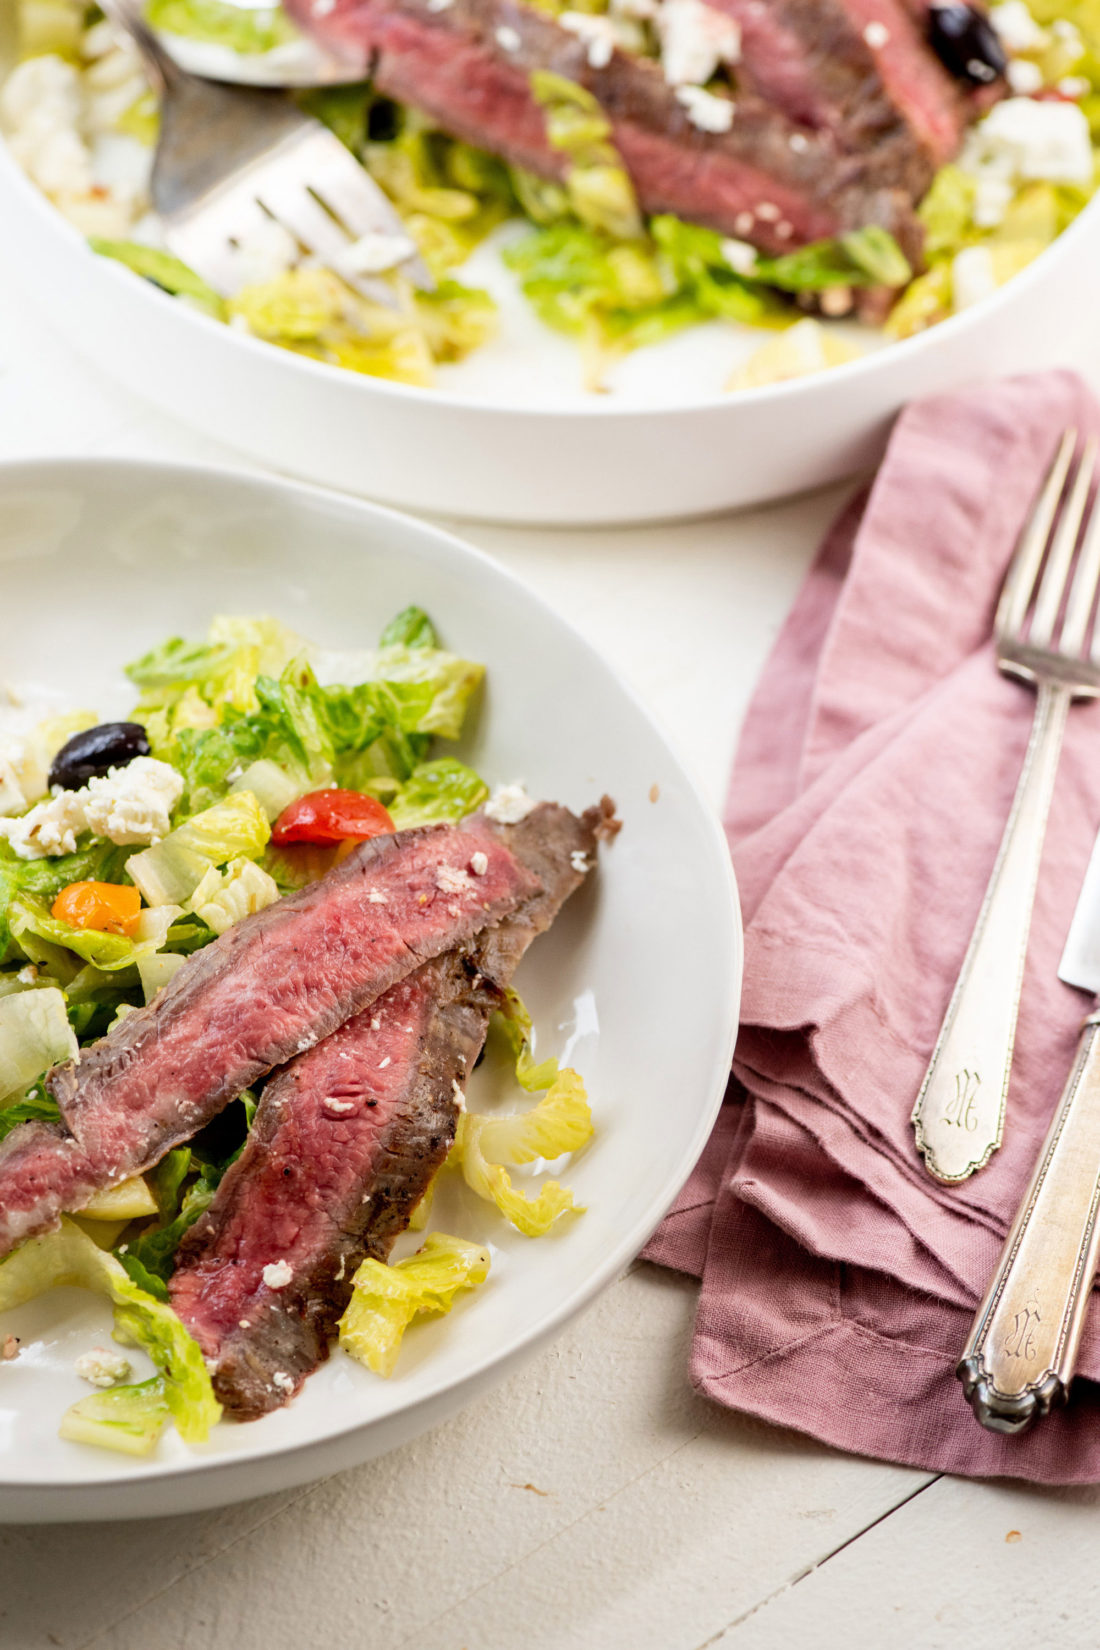 Silverware and cloth napkins next to a plate of Greek Salad with Flank Steak.